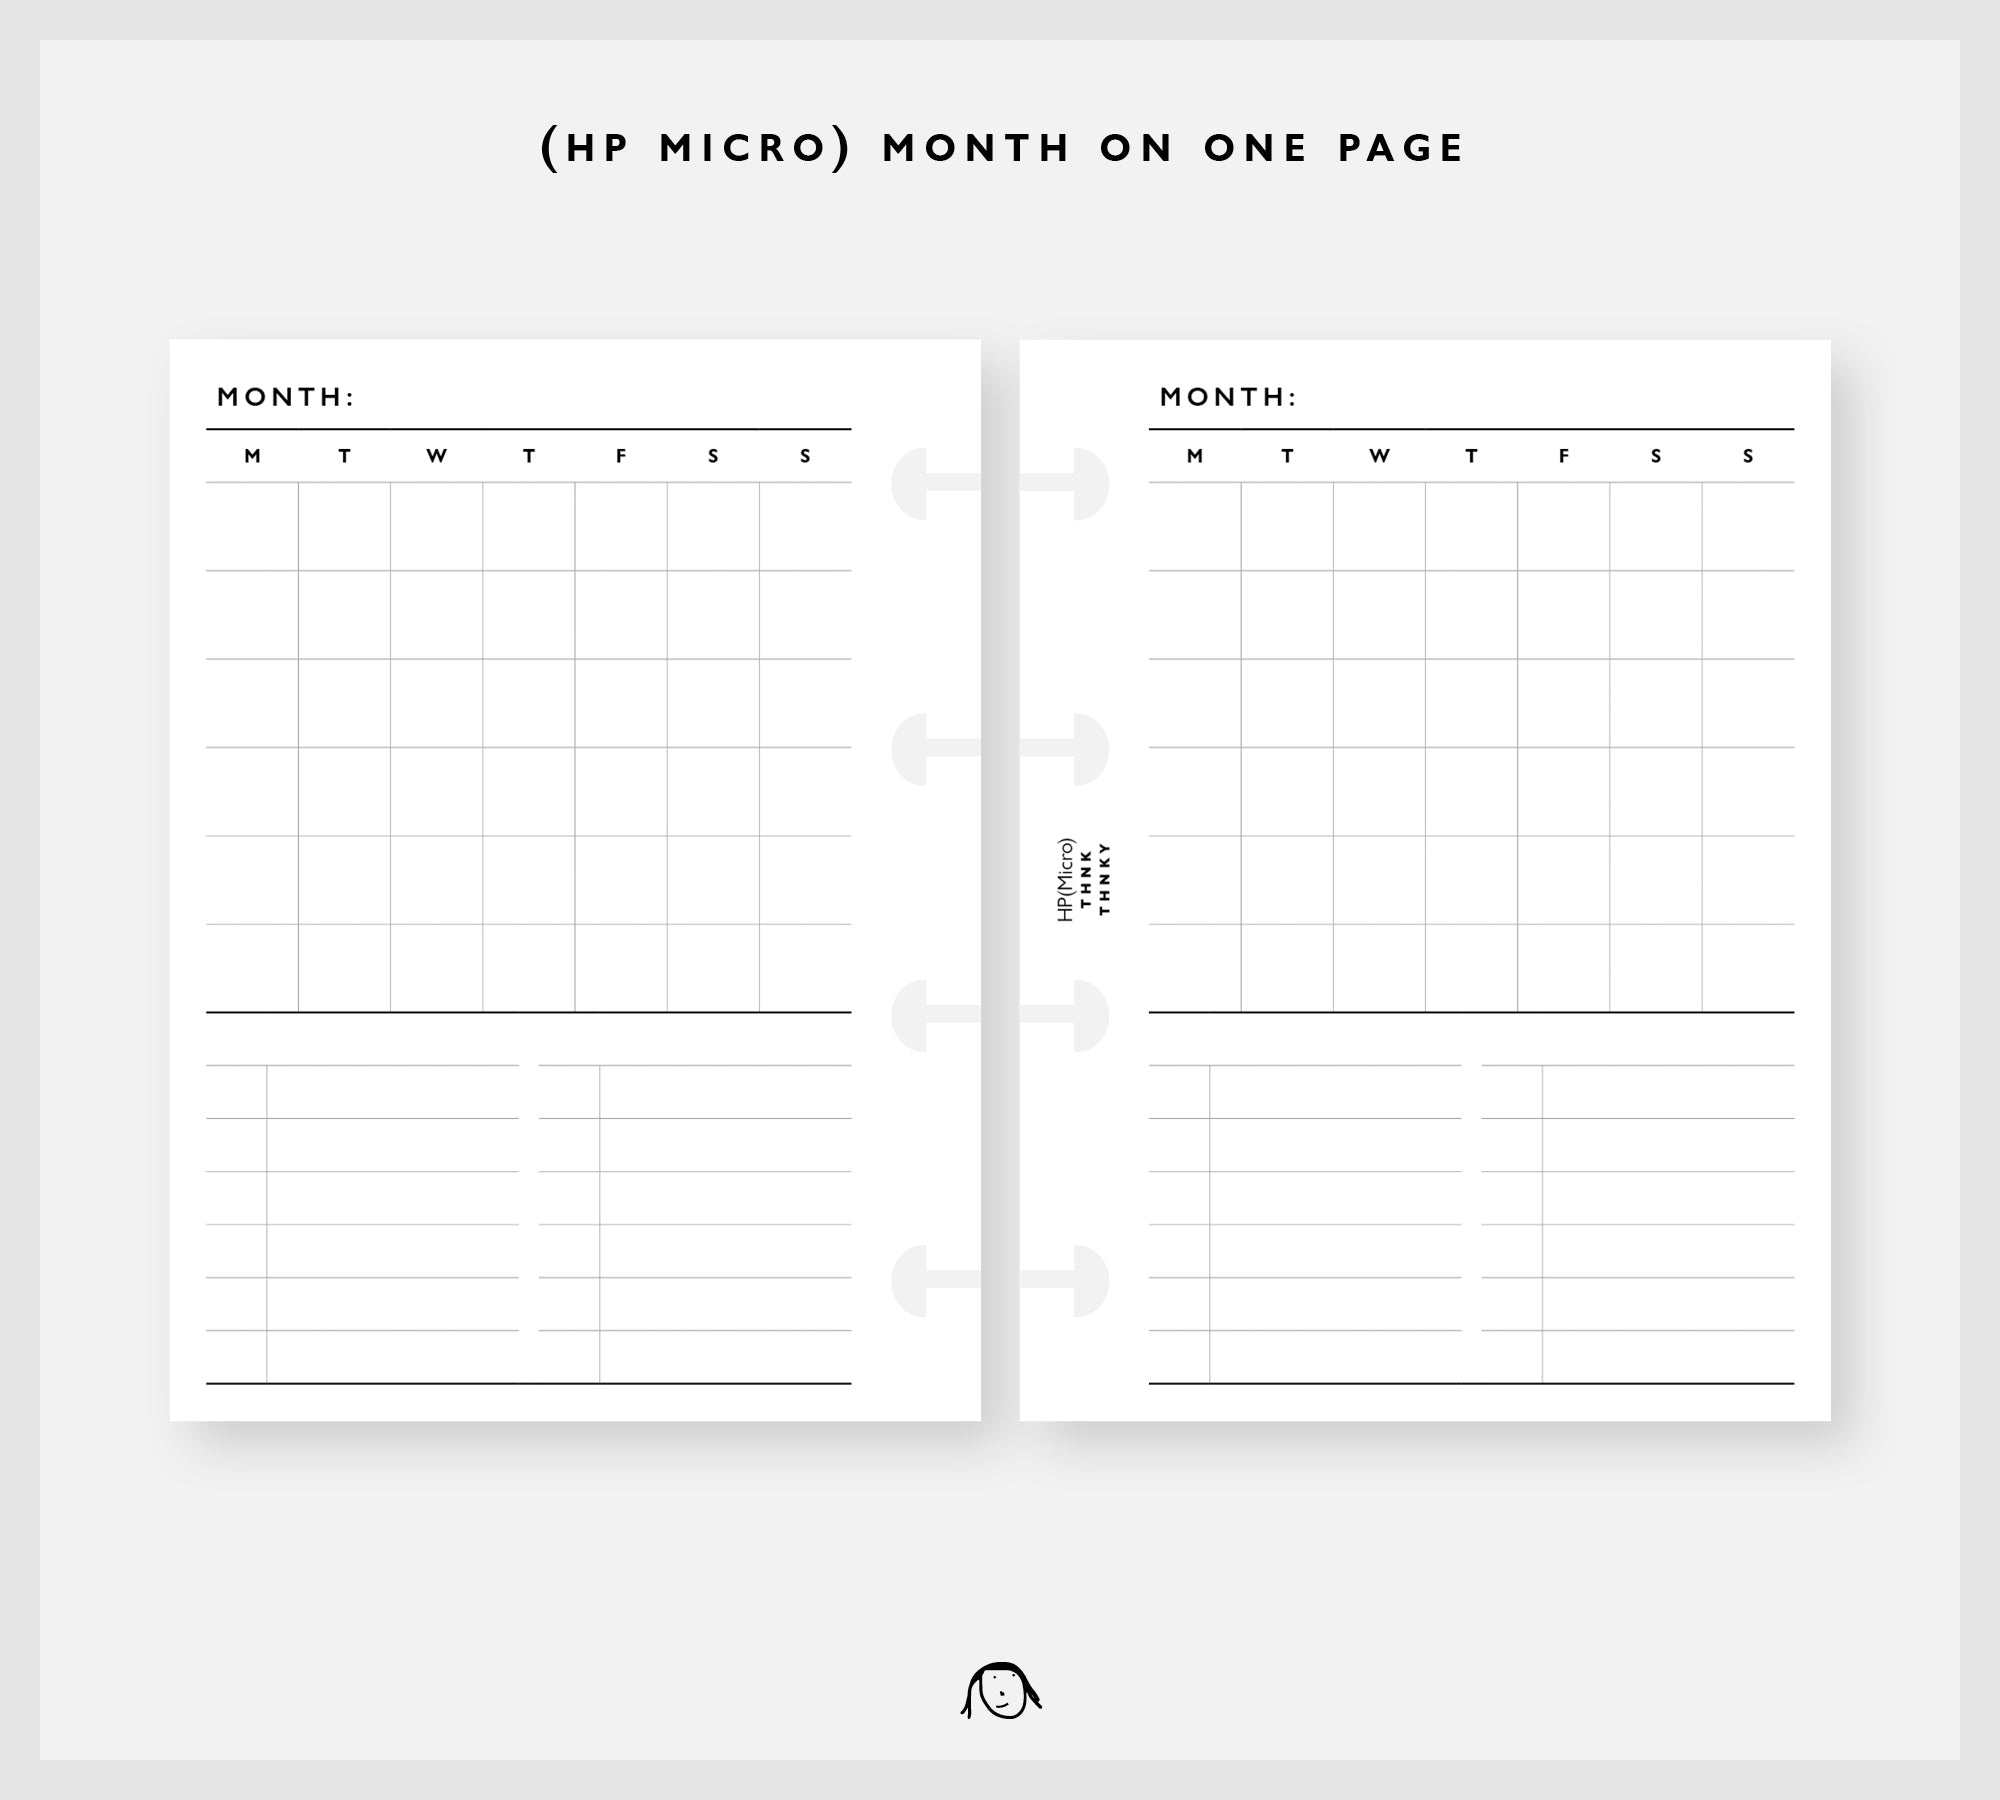 MCM2-HP Micro Size Month on 1 Page